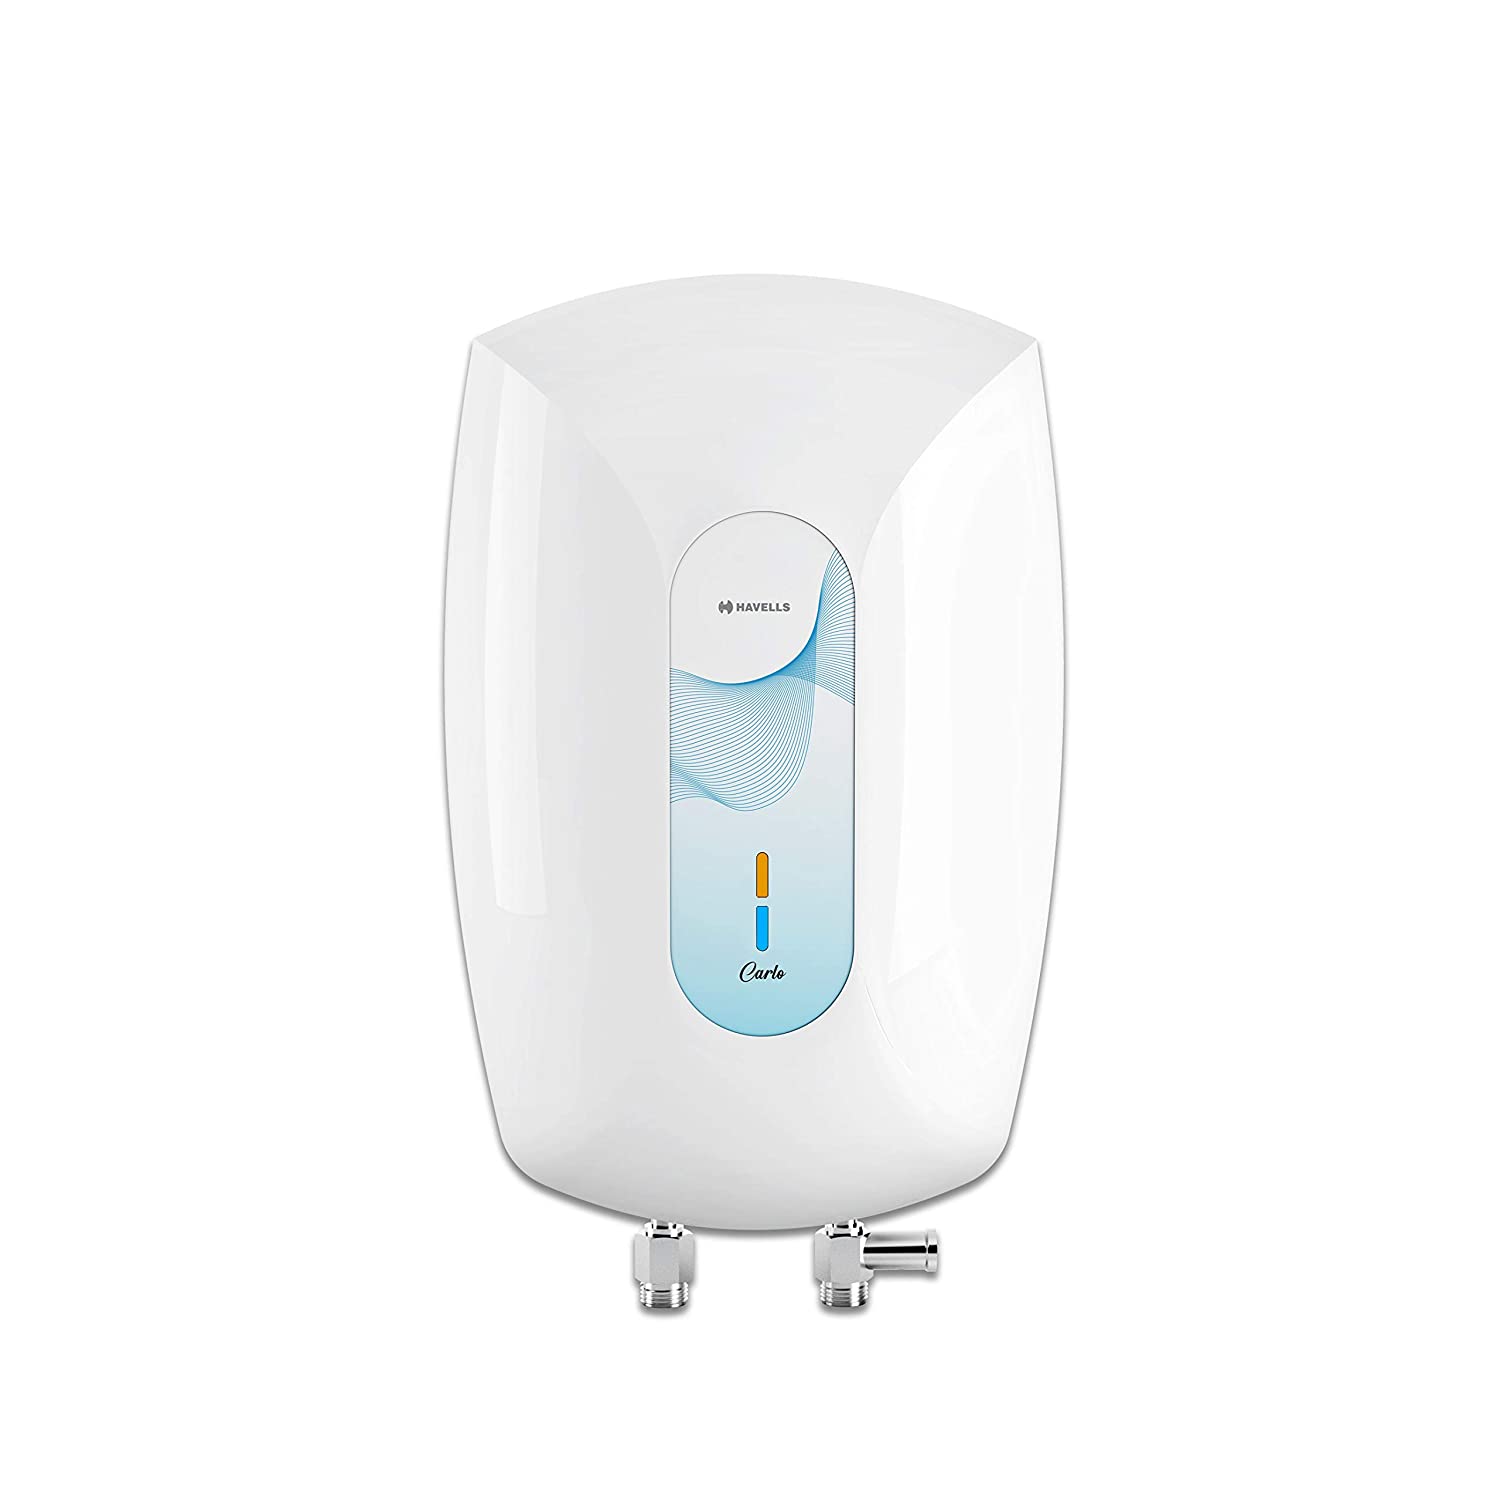 CAPITAL Instant Water Geyser 1 L Portable water heater, Made of First Class  ABS Plastic, Auto Cut Off Feature with 1 Year Warranty, For Home, Office